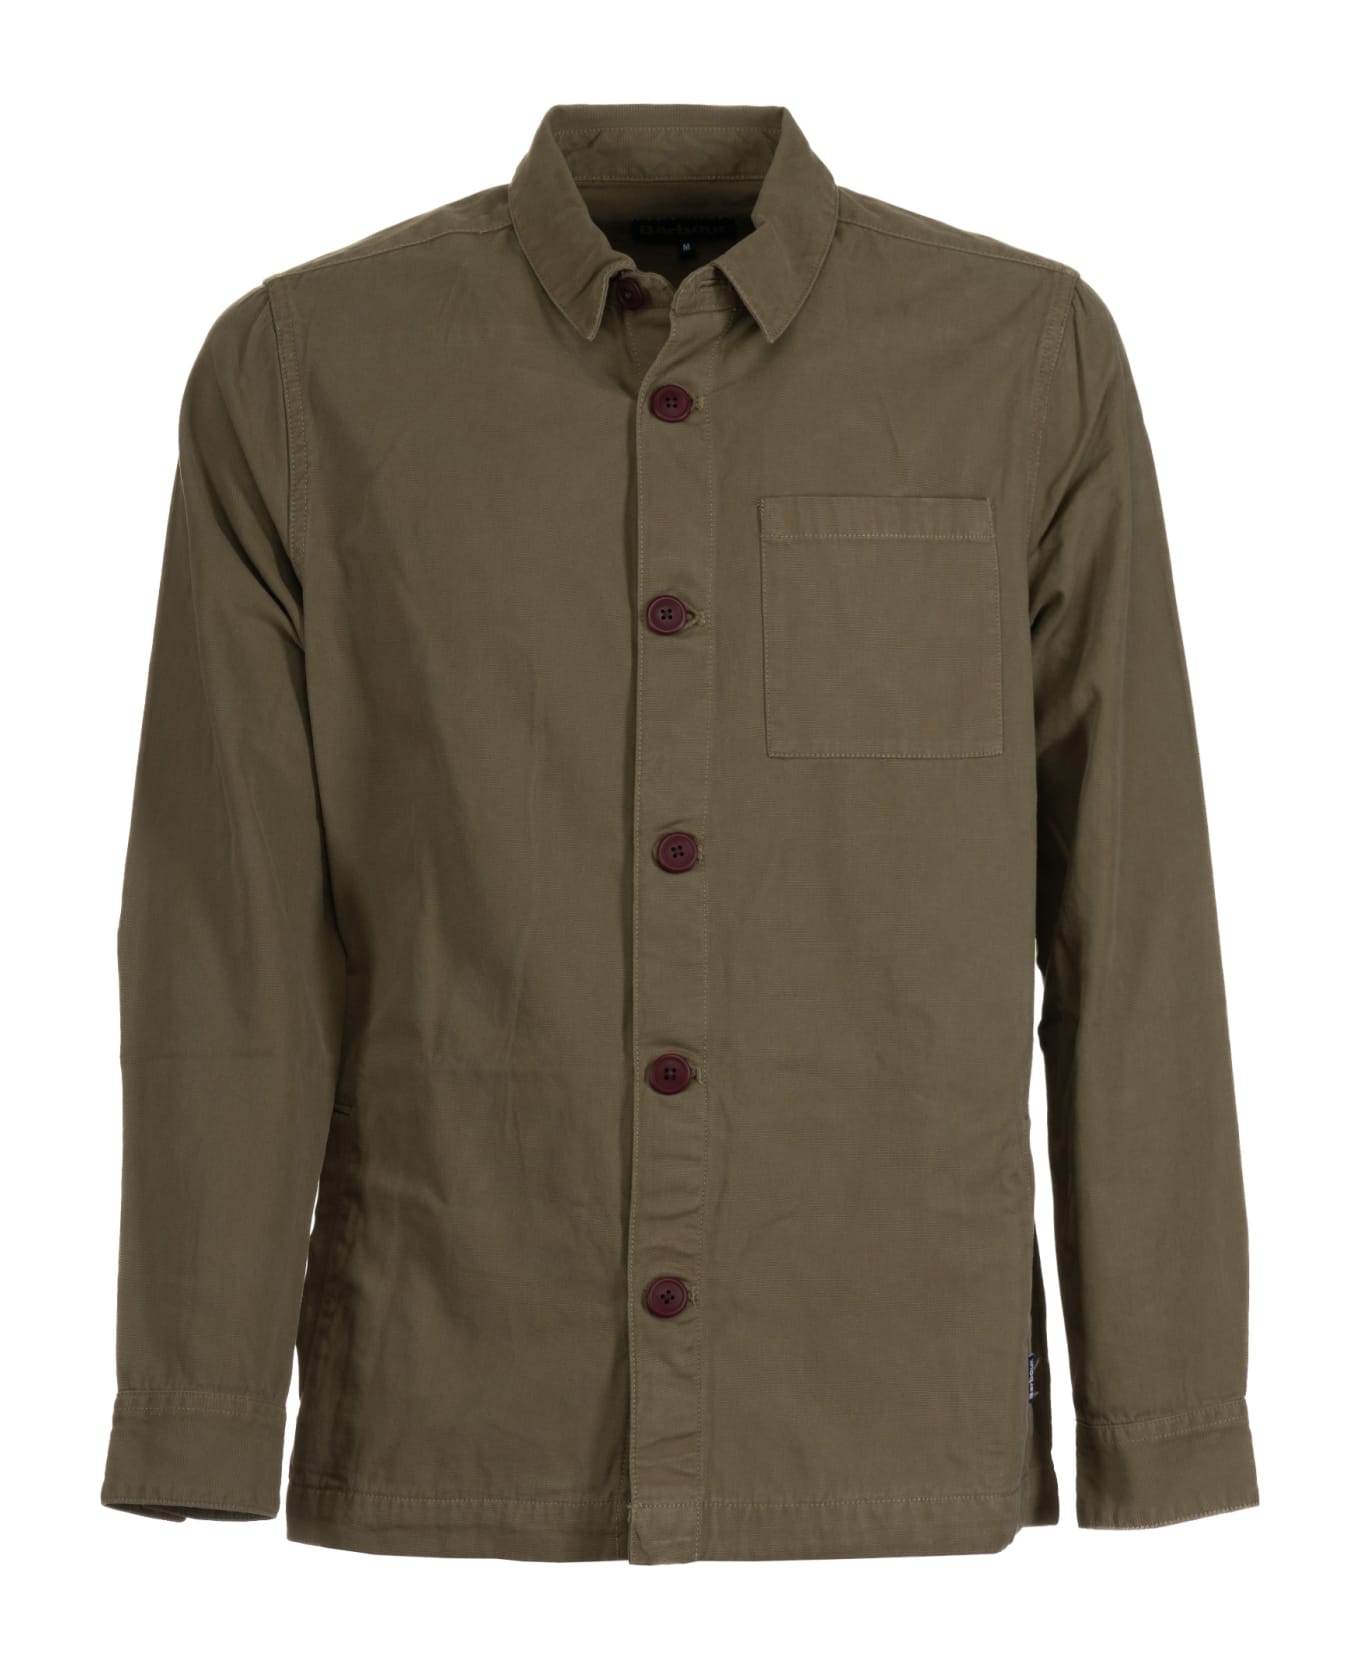 Barbour Washed Overshirt - Green